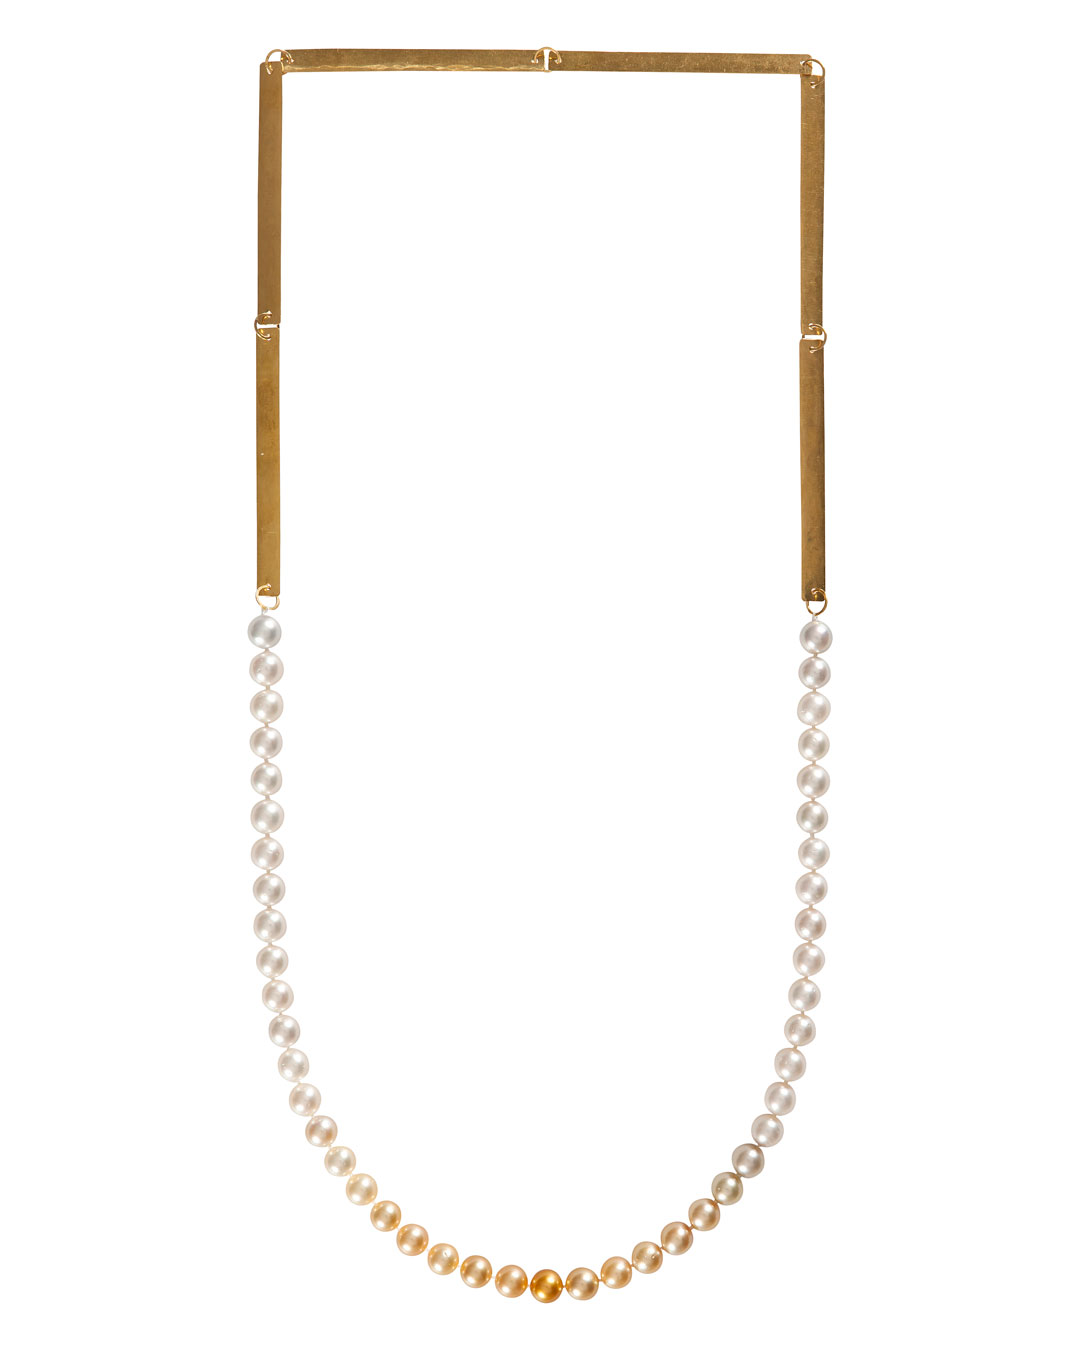 Annelies Planteijdt, Mooie stad – Collier en Chanel no.19 (Beautiful City - Necklace with Chanel no.19), 2017, necklace, gold, South Sea pearls, 150 x 360 mm, price on request (image 1/3)